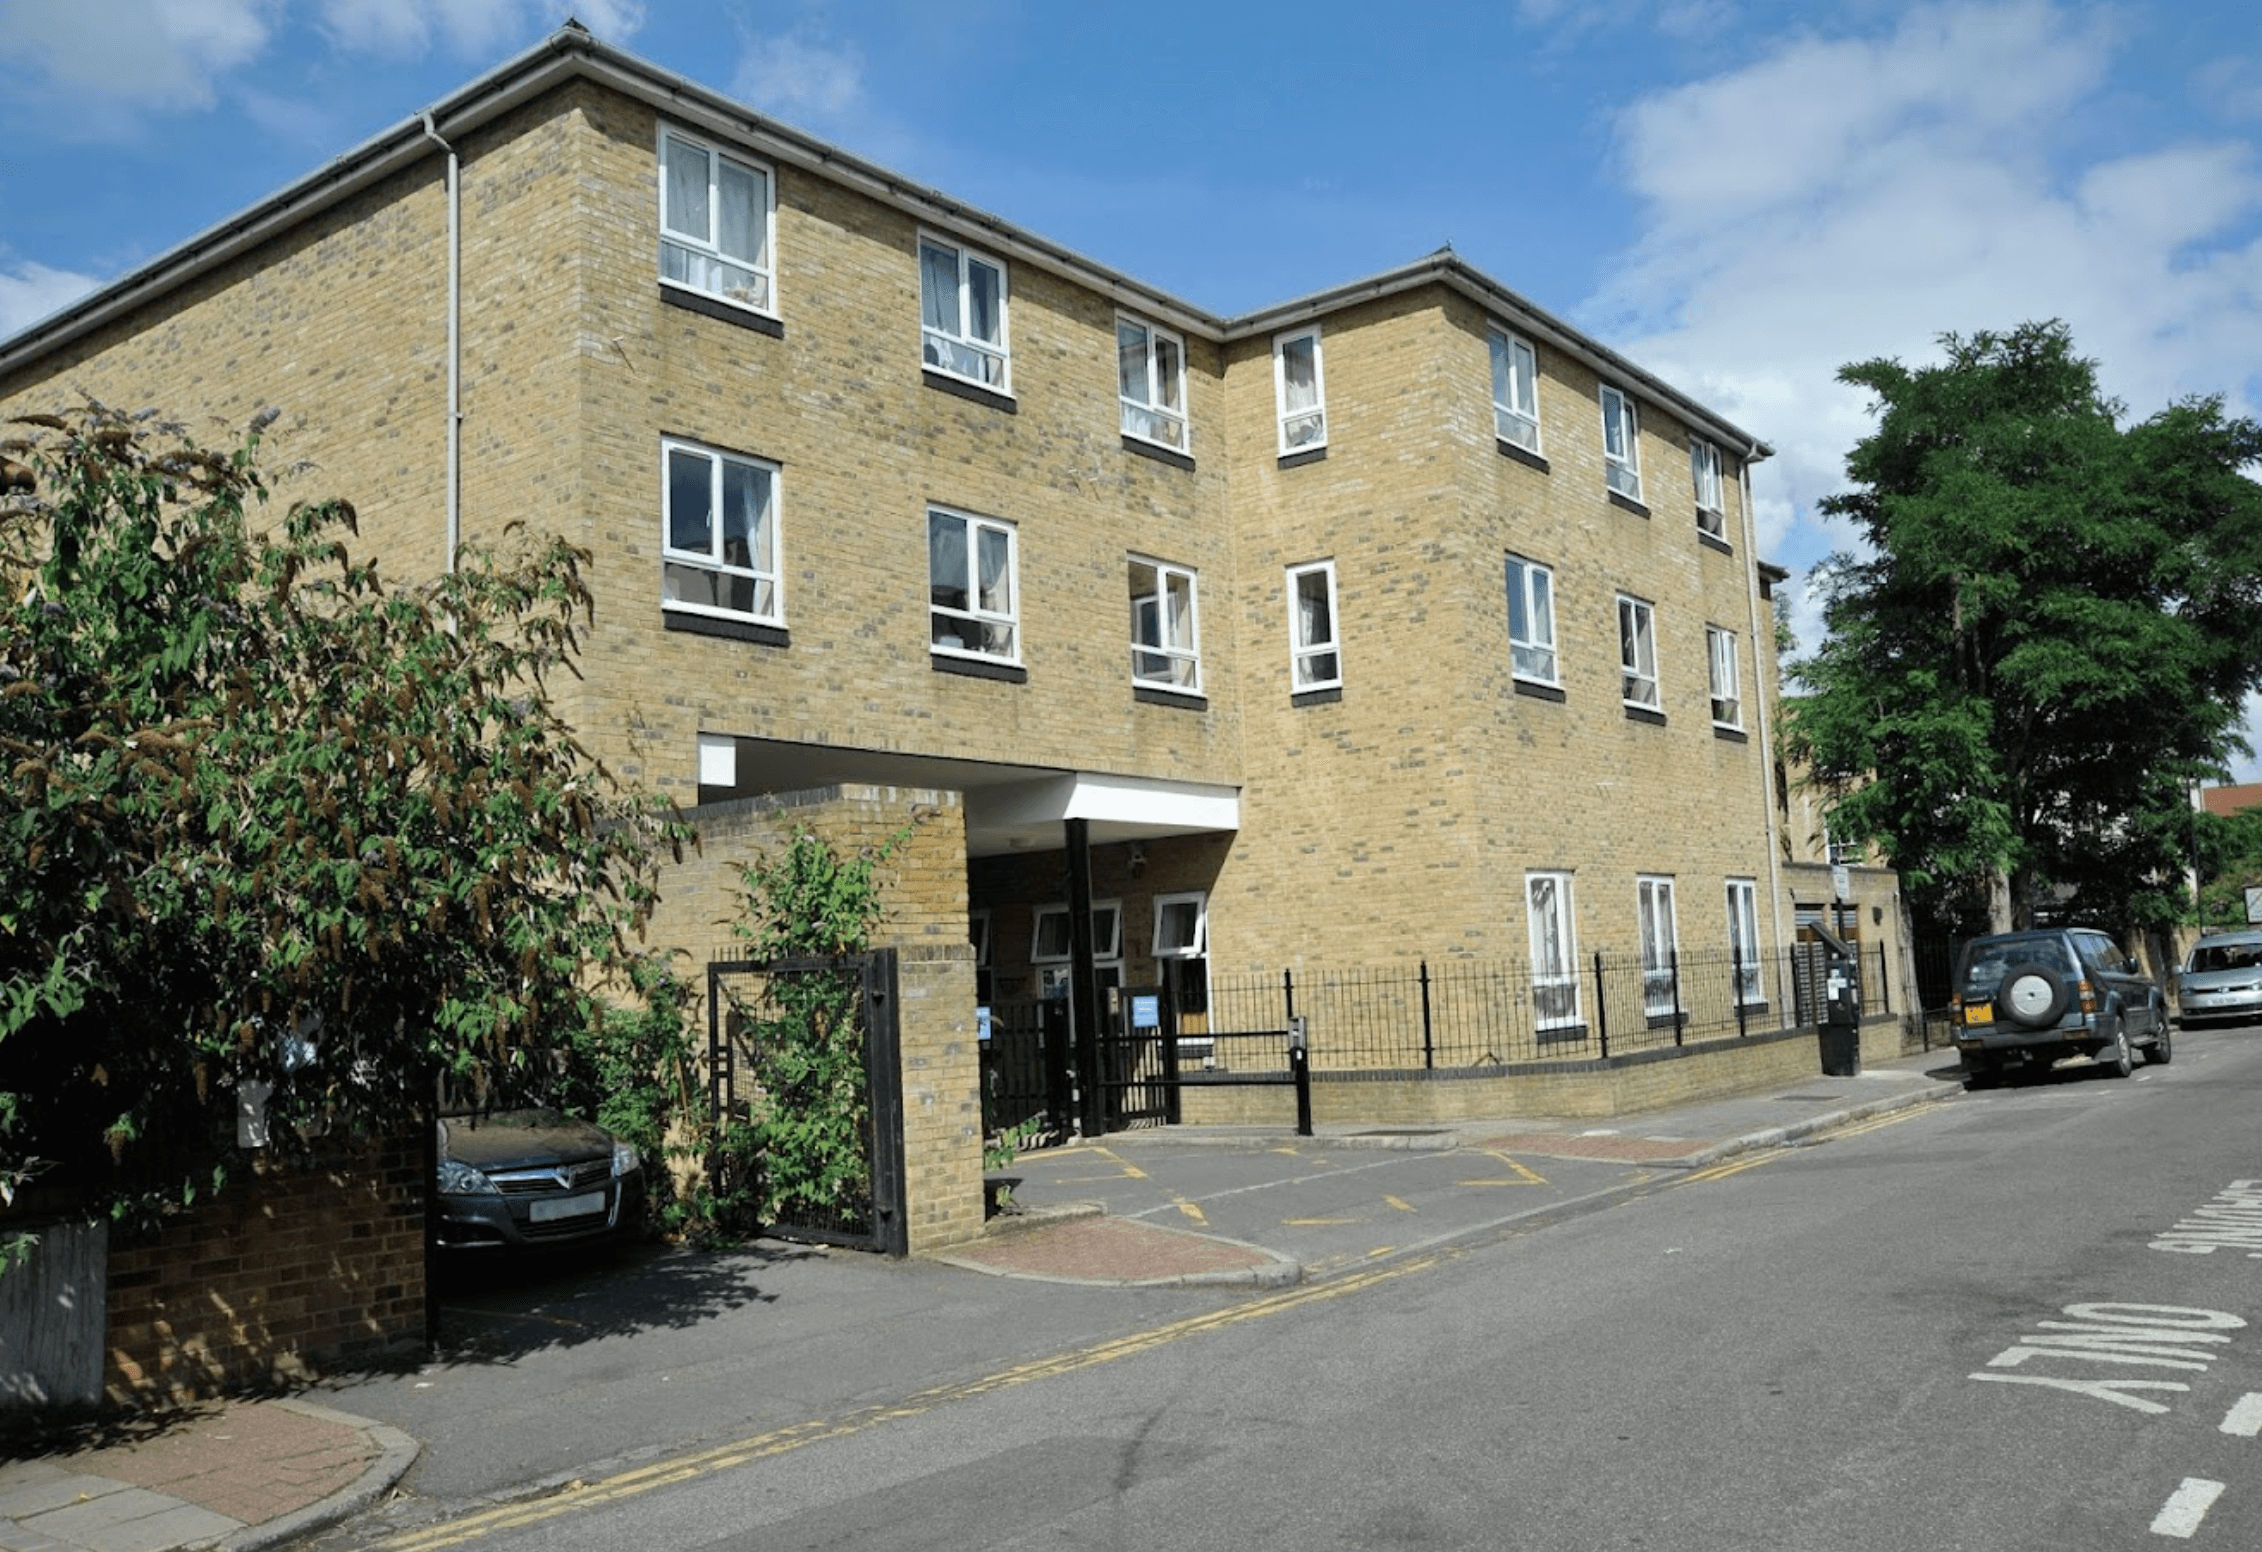 Exterior of Haverlock Court care home in Stockwell, London